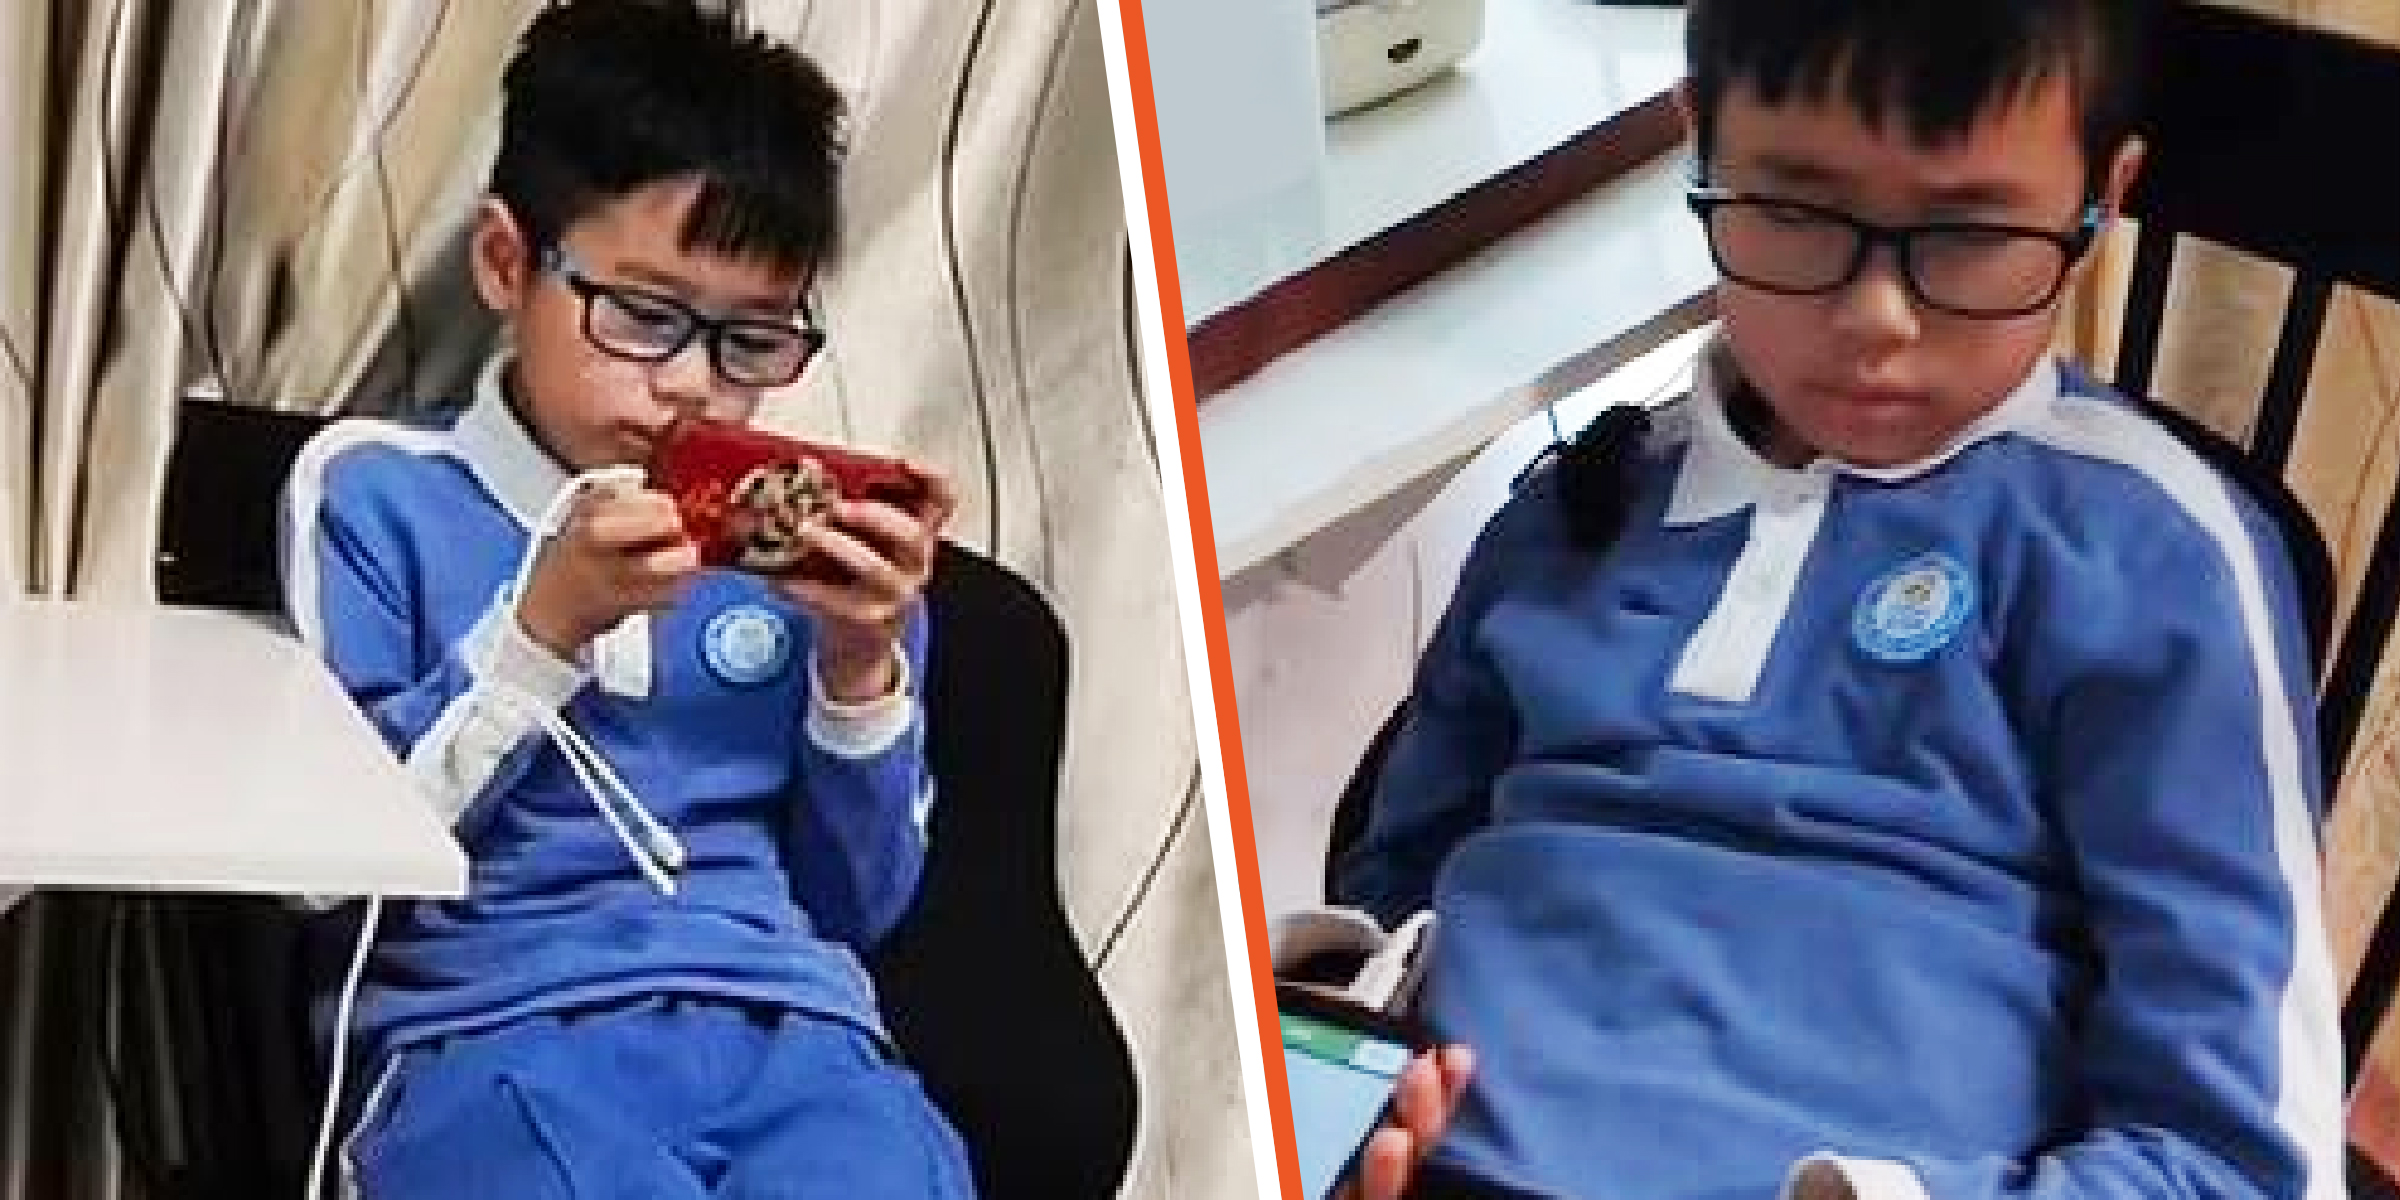 The 11-year-old Chinese boy | Source: facebook.com/DailyMail